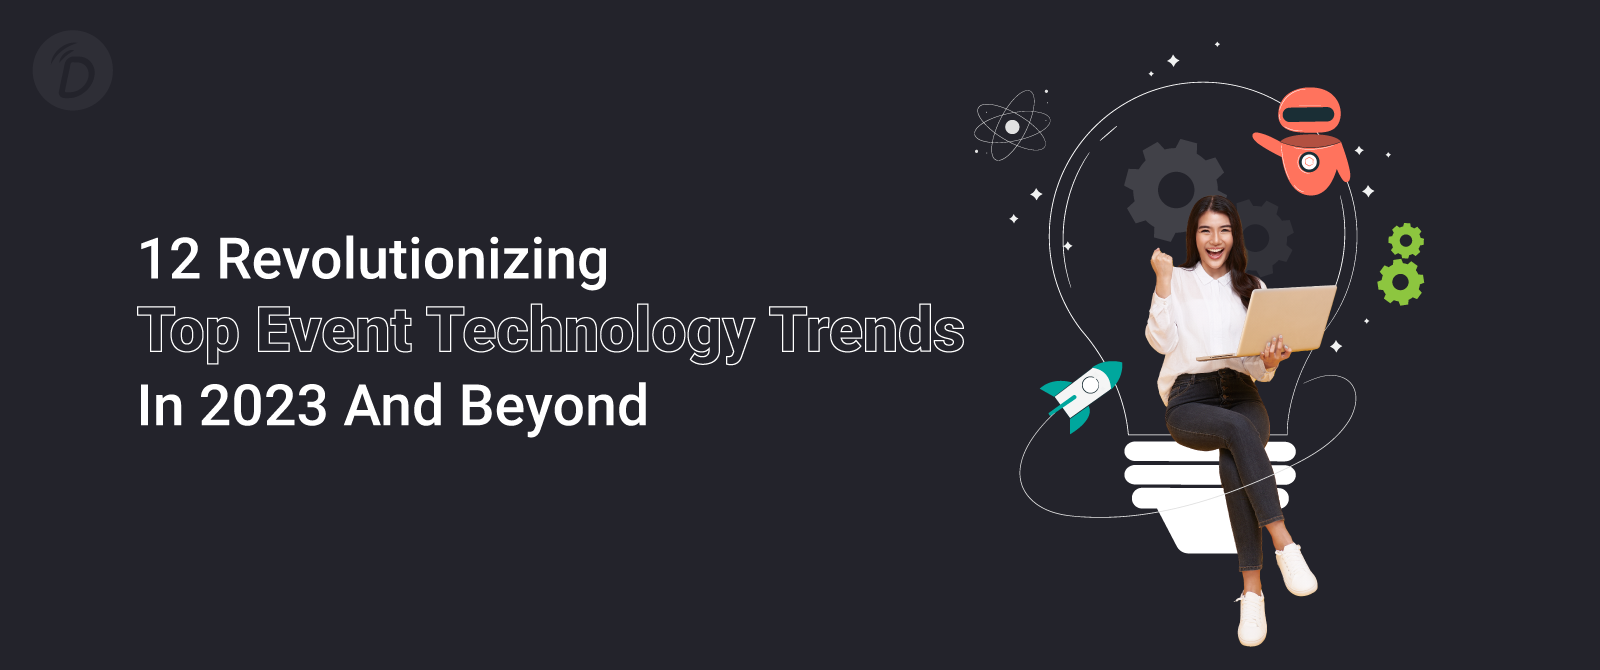 12 Revolutionizing Top Event Technology Trends in 2022 and Beyond